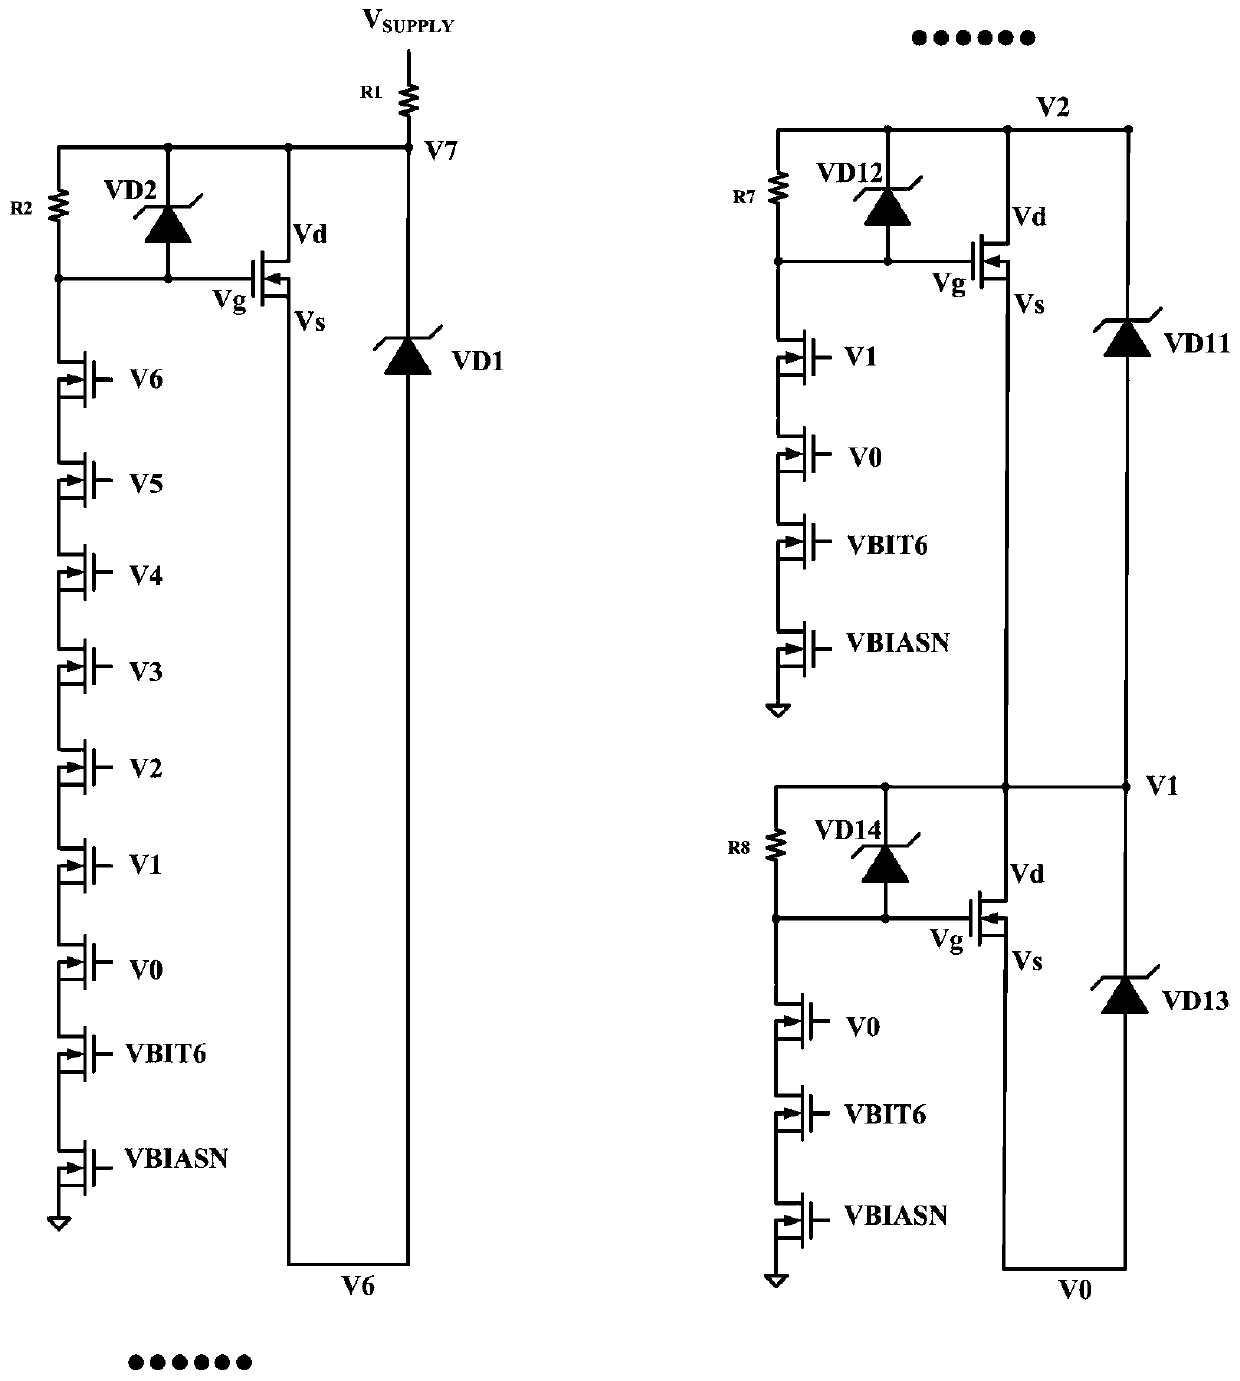 High-voltage detection circuit for overvoltage protection